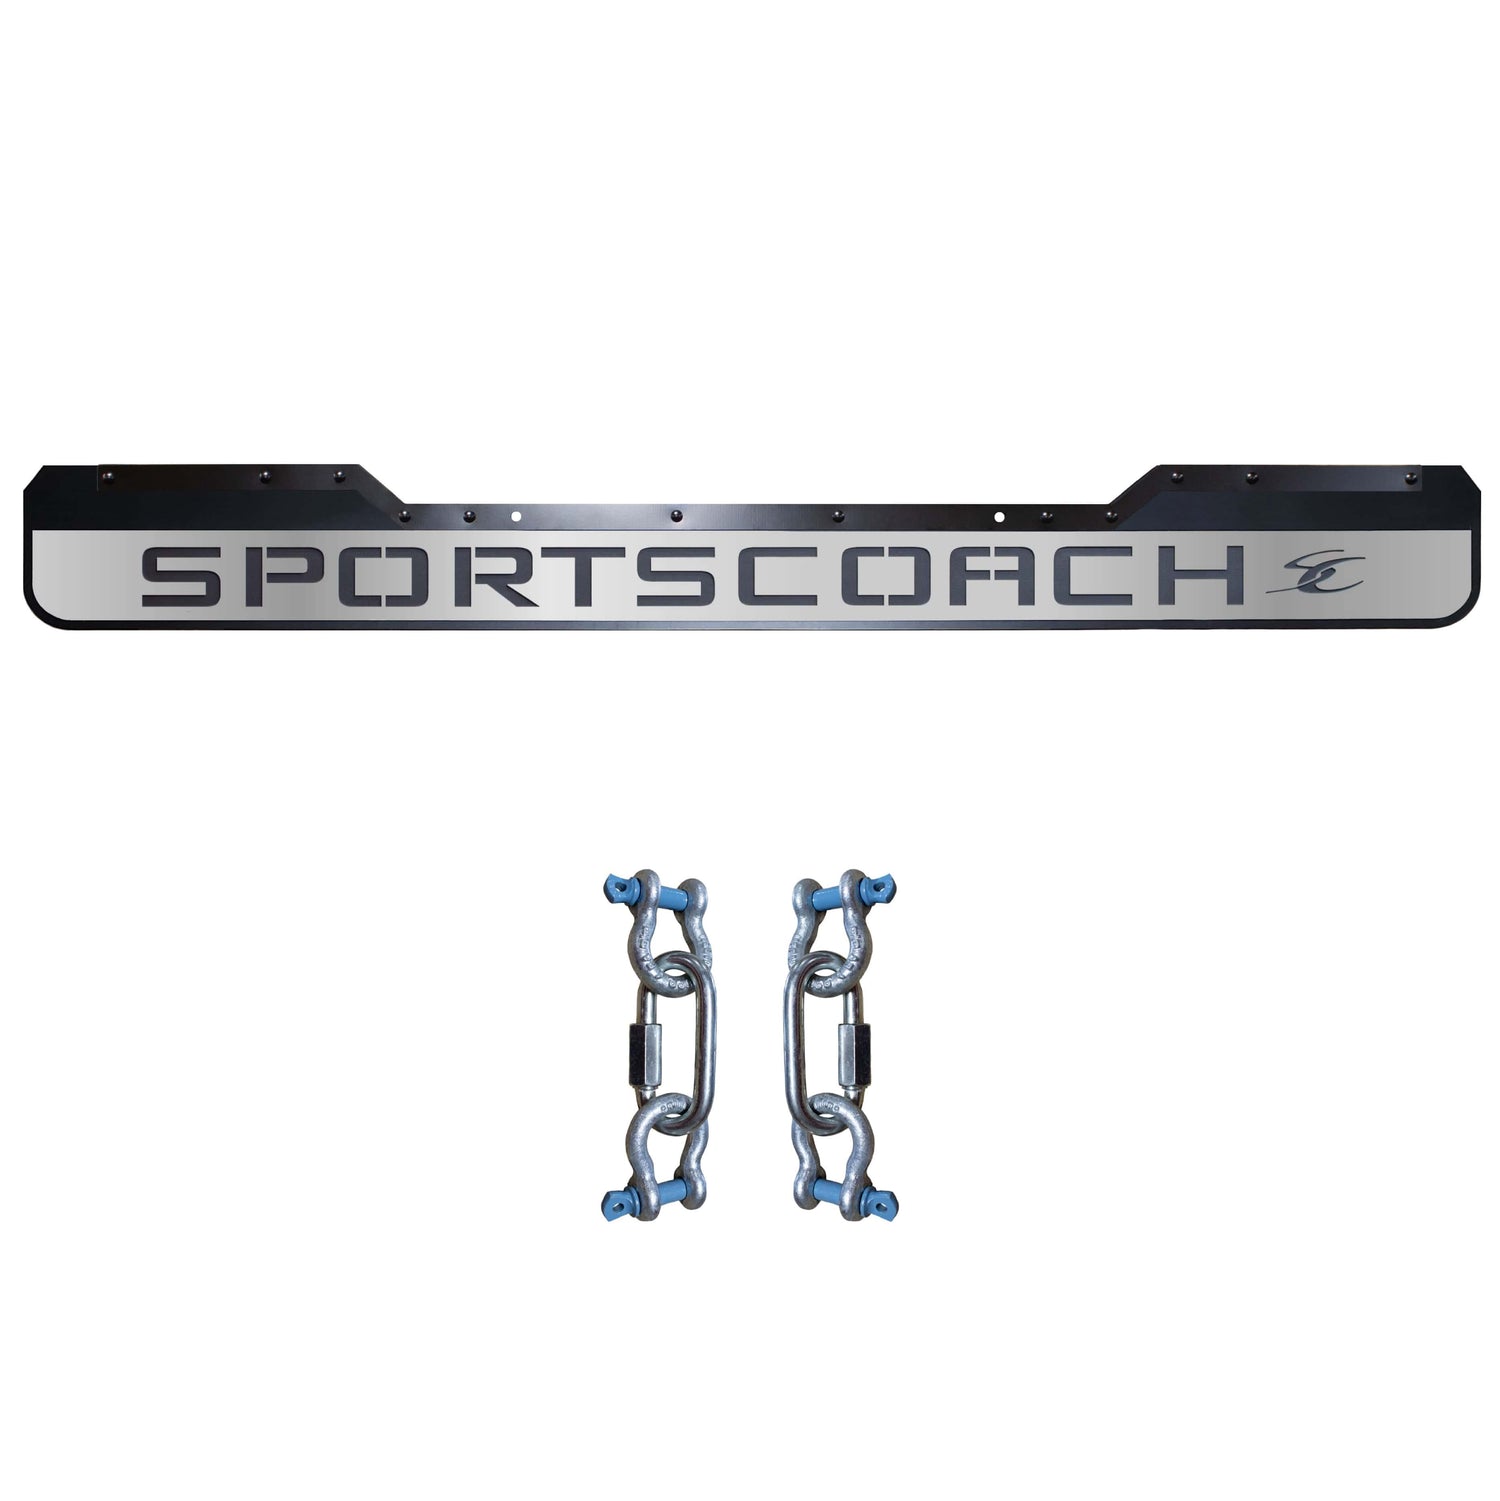 Future-Sales-Rock-Guard-SPORTSCOACH-11-Notched-Sportscoach-MFR-SC-11N-11-by-95-Center-Notch-Mirror-Finish-Face-Plate-replacement-hardware